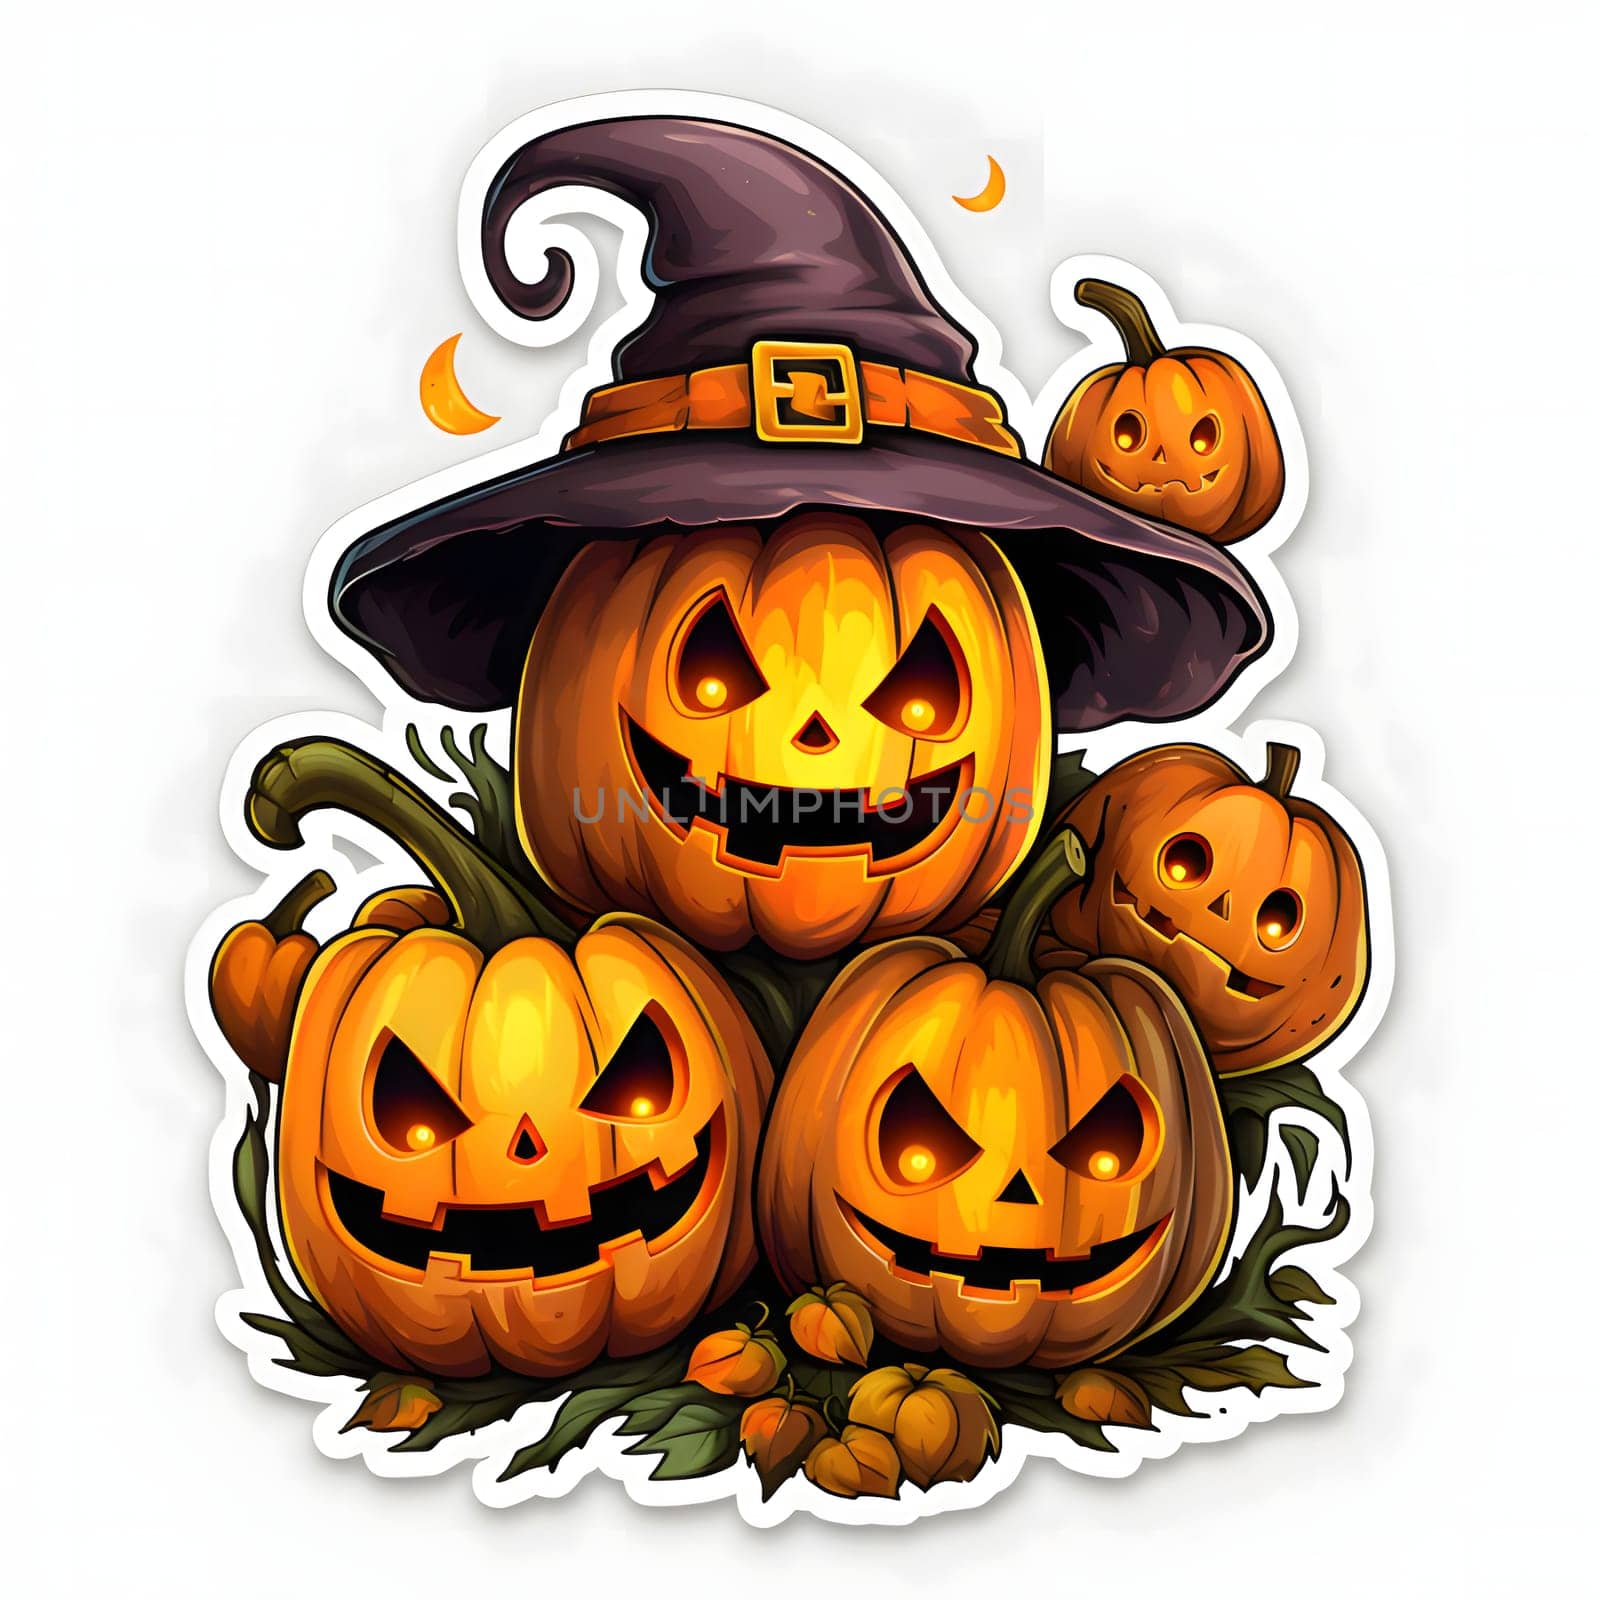 Sticker five jack-o-lantern pumpkins with glowing eyes one in a witch hat, Halloween image on a white isolated background. by ThemesS